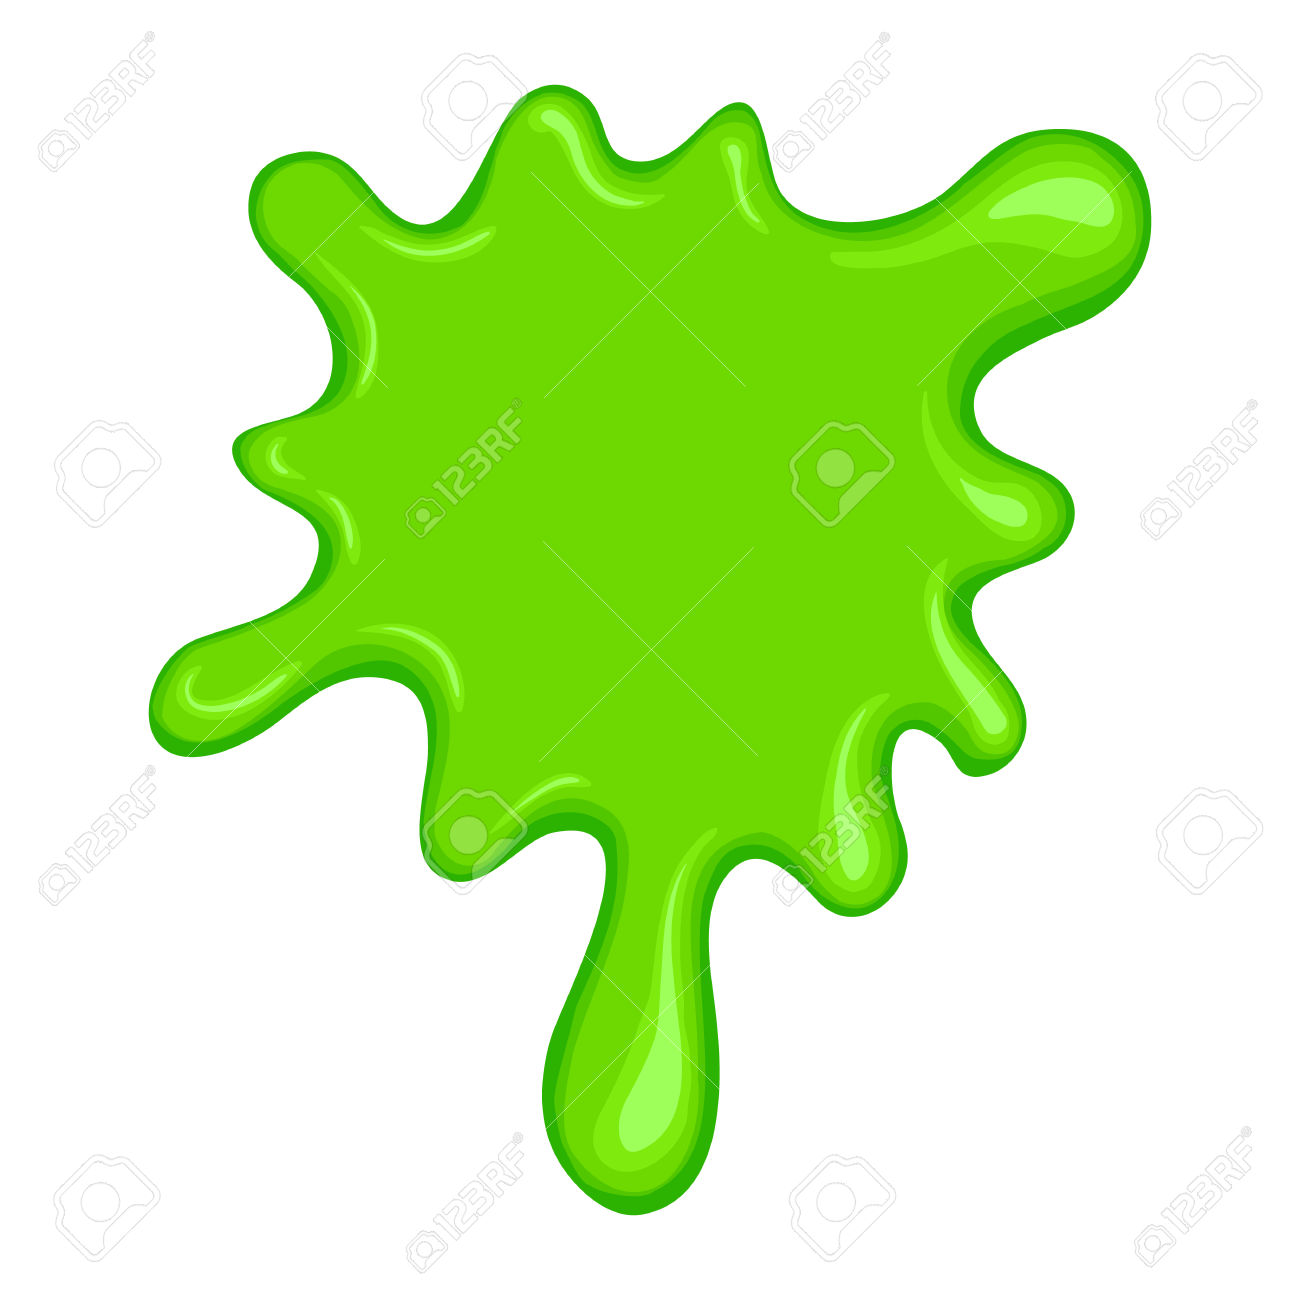 Green slime symbol isolated on .